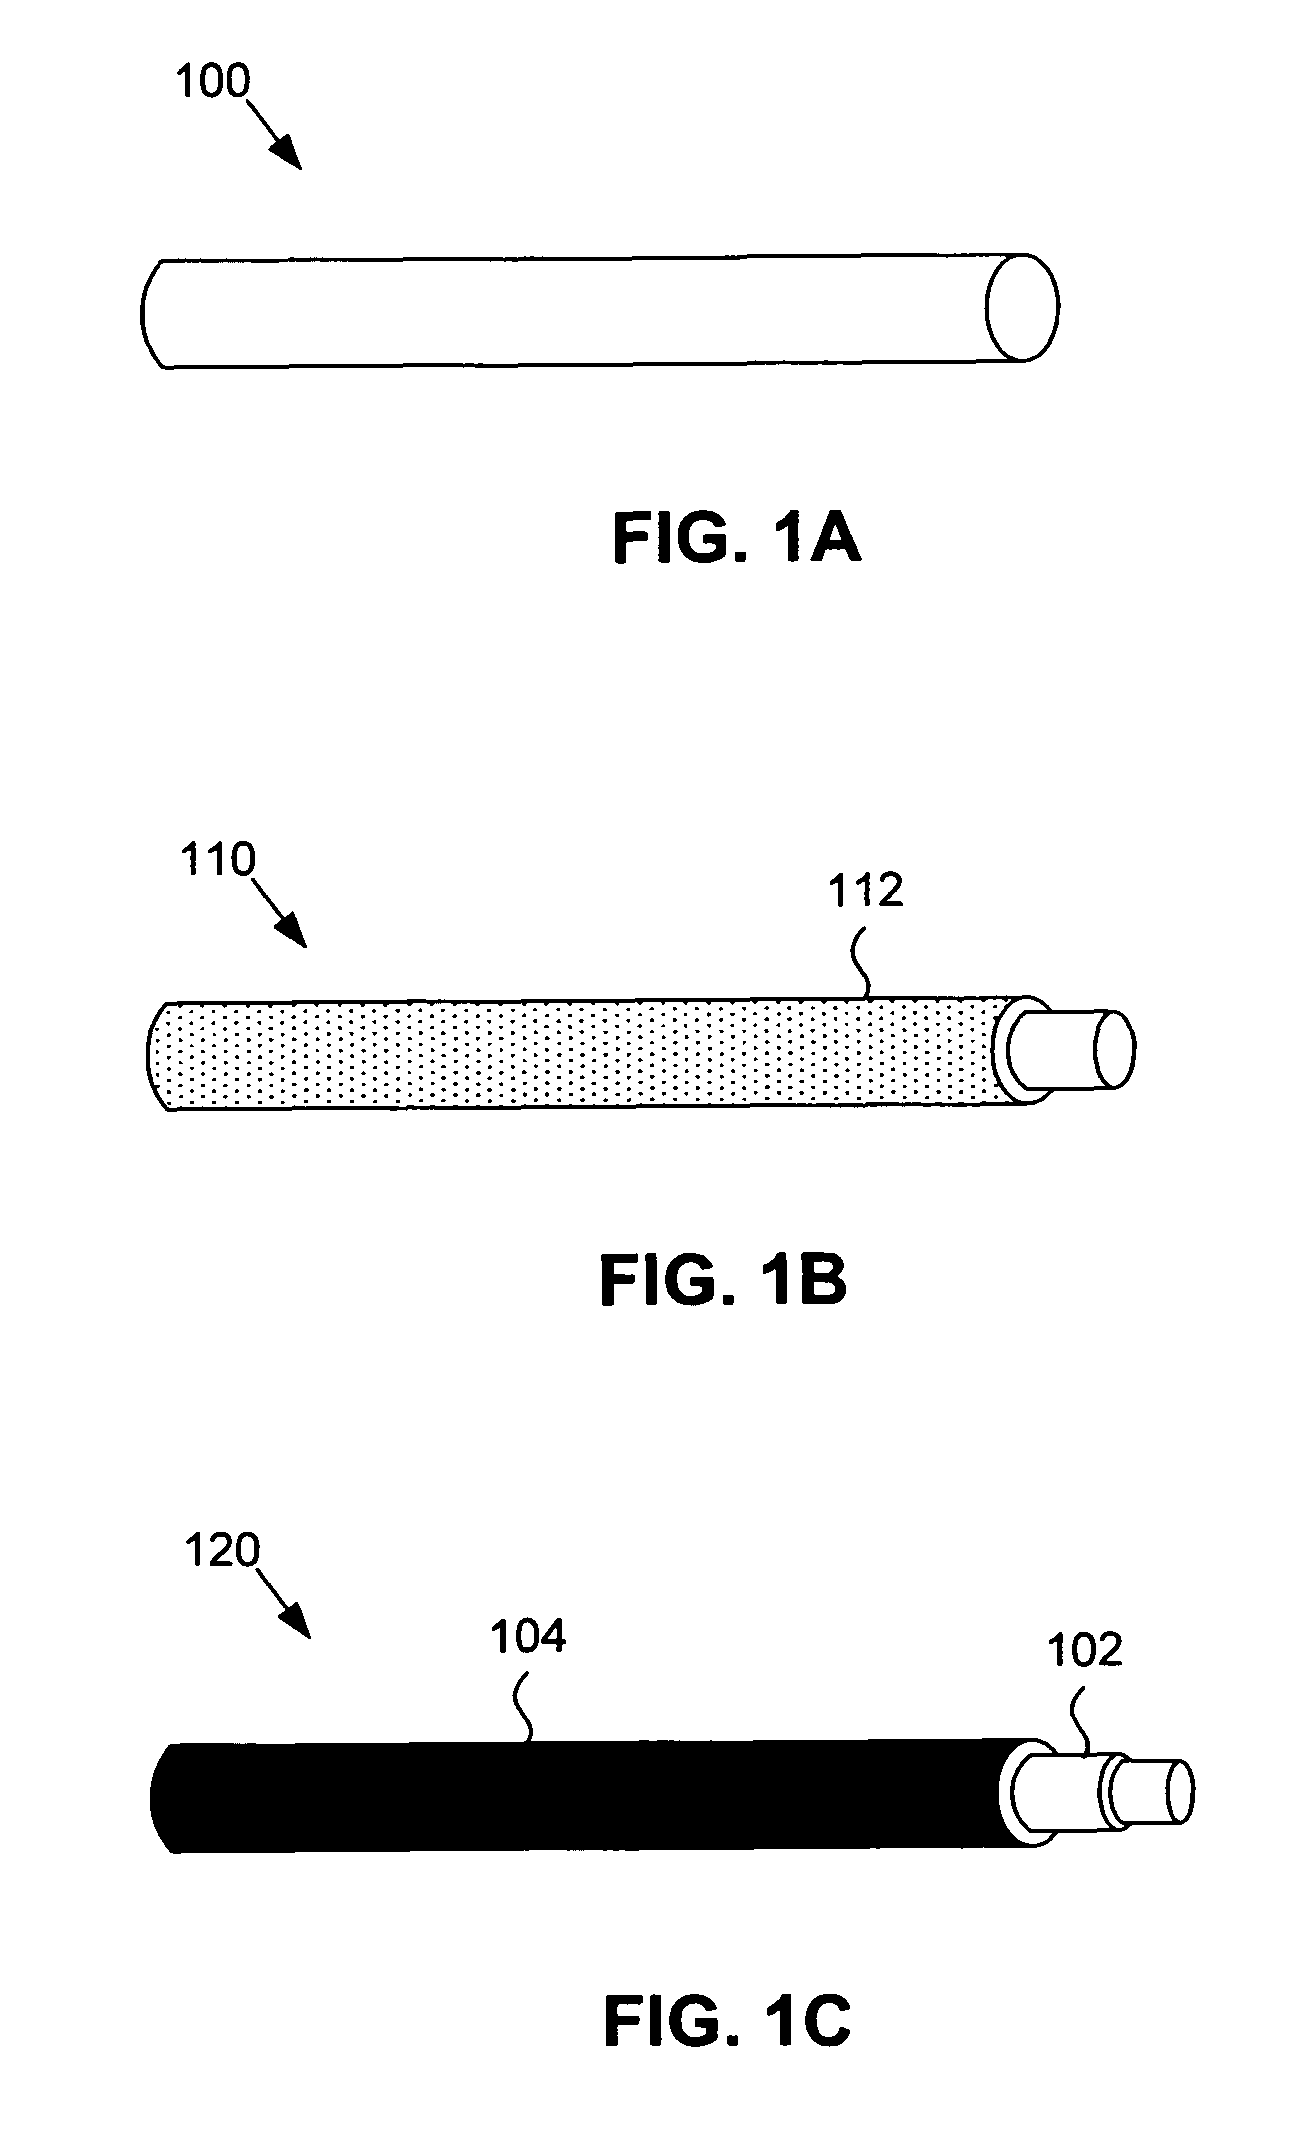 Continuously variable graded artificial dielectrics using nanostructures